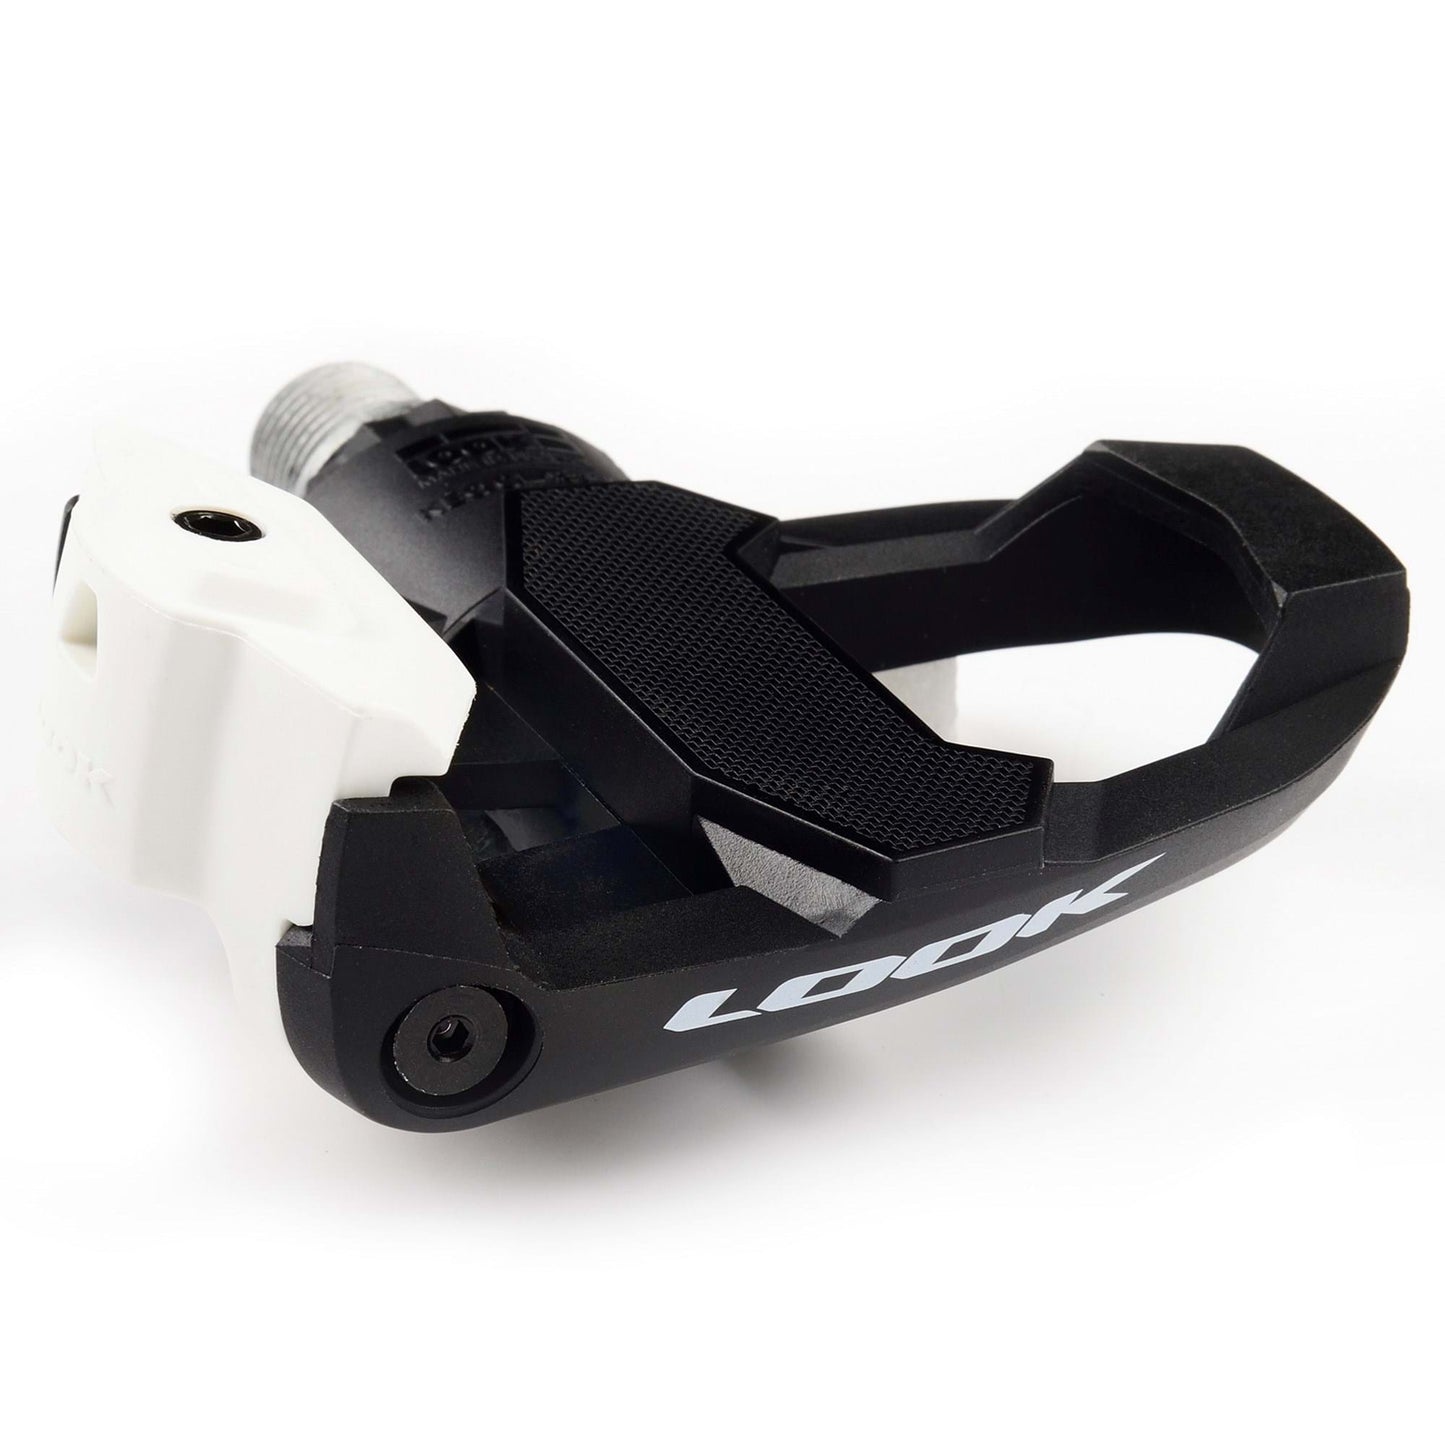 LOOK KEO CLASSIC 3 PEDALS WITH KEO GRIP CLEAT